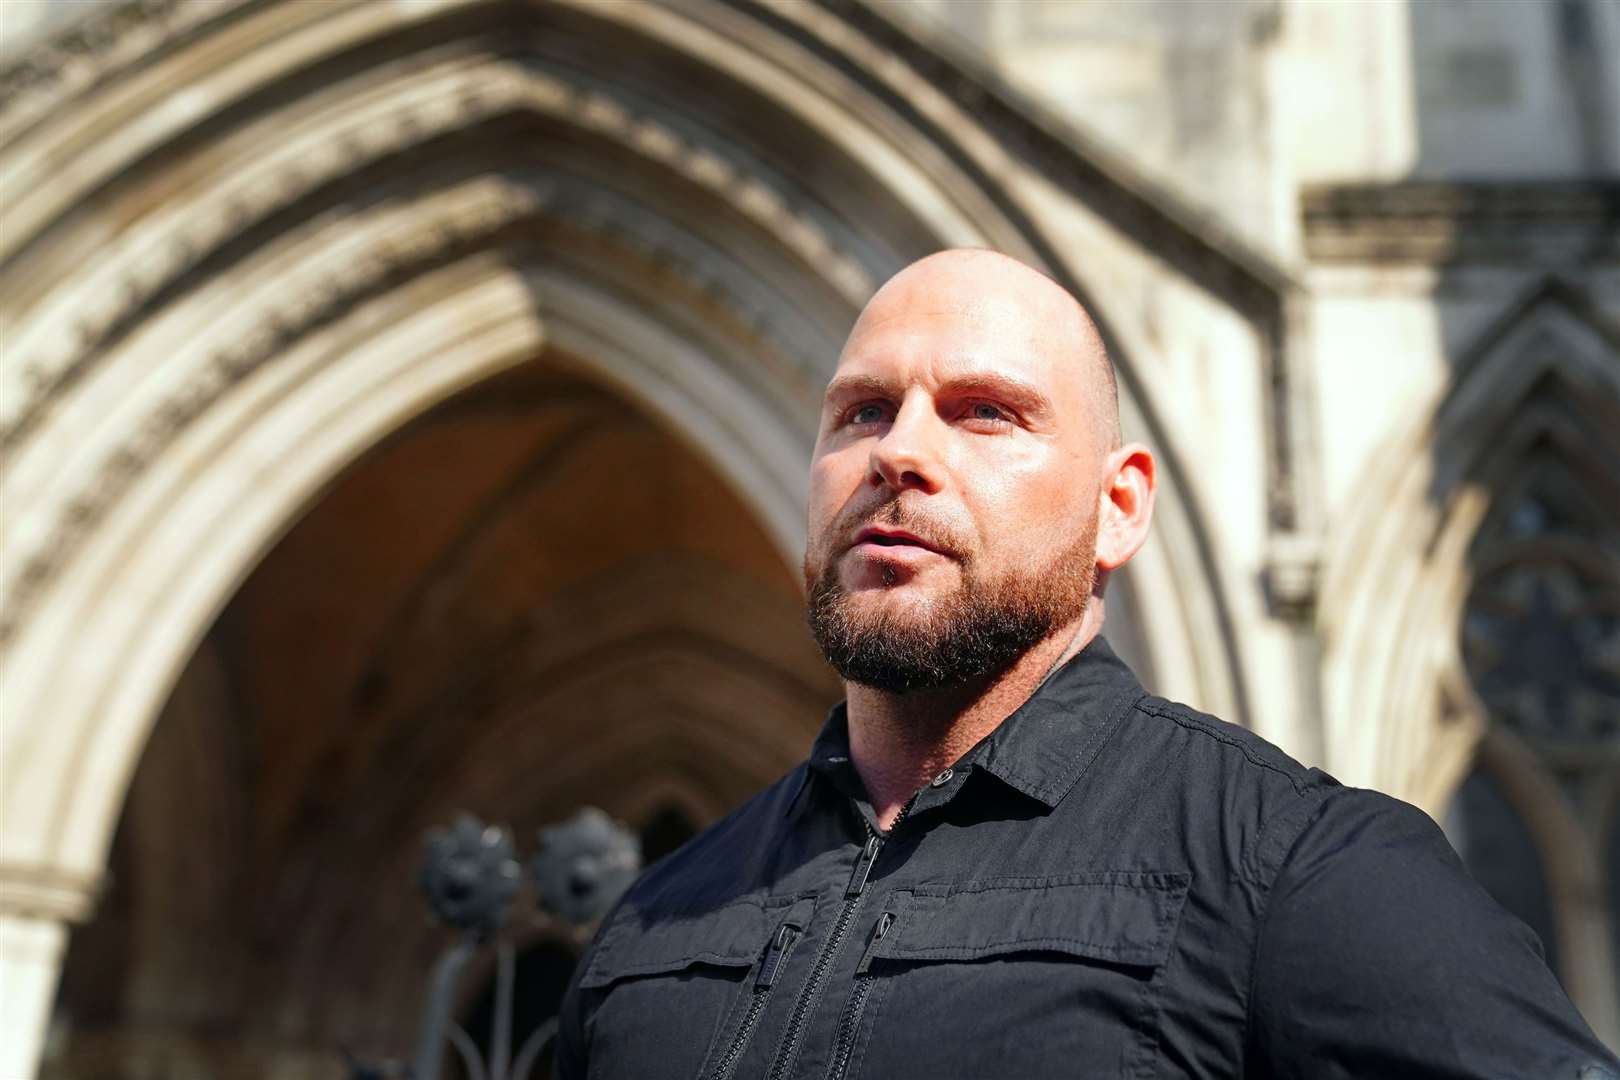 Dean Gregory, the father of Indi Gregory, at the Royal Courts of Justice in central London (Victoria Jones/PA)